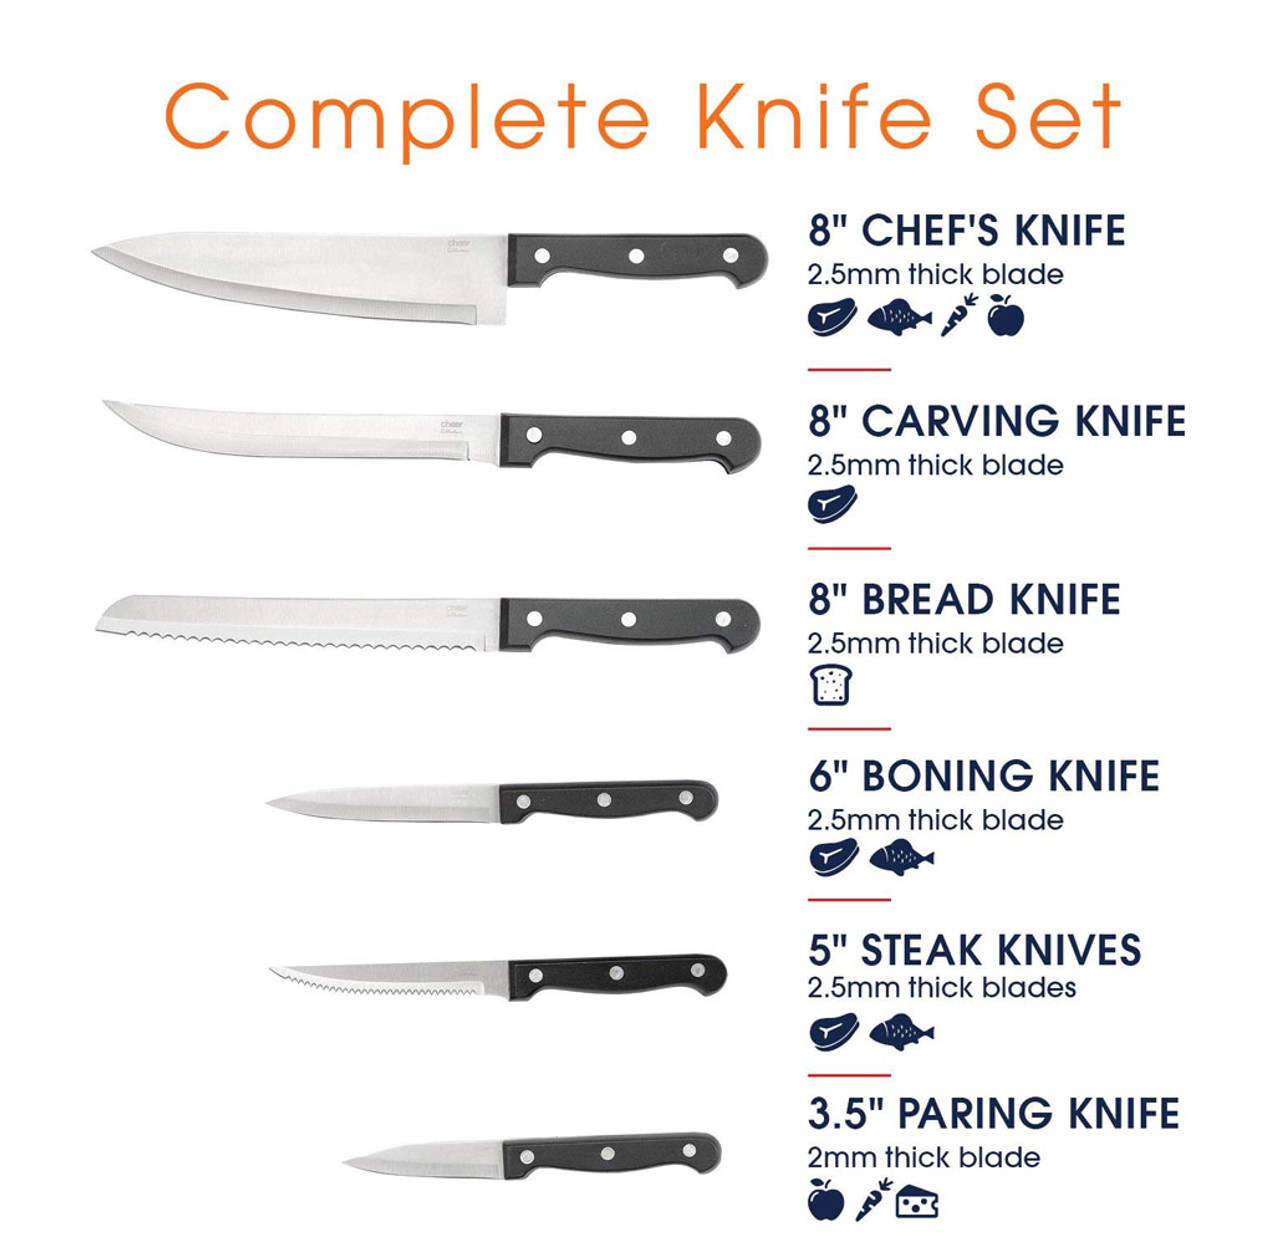 Knife Set With Wooden Block - 15 Piece Set Includes Chef Knife, Bread  Knife, Carving Knife, Utility Knife, Paring Knife, Steak Knife, Boning  Knife